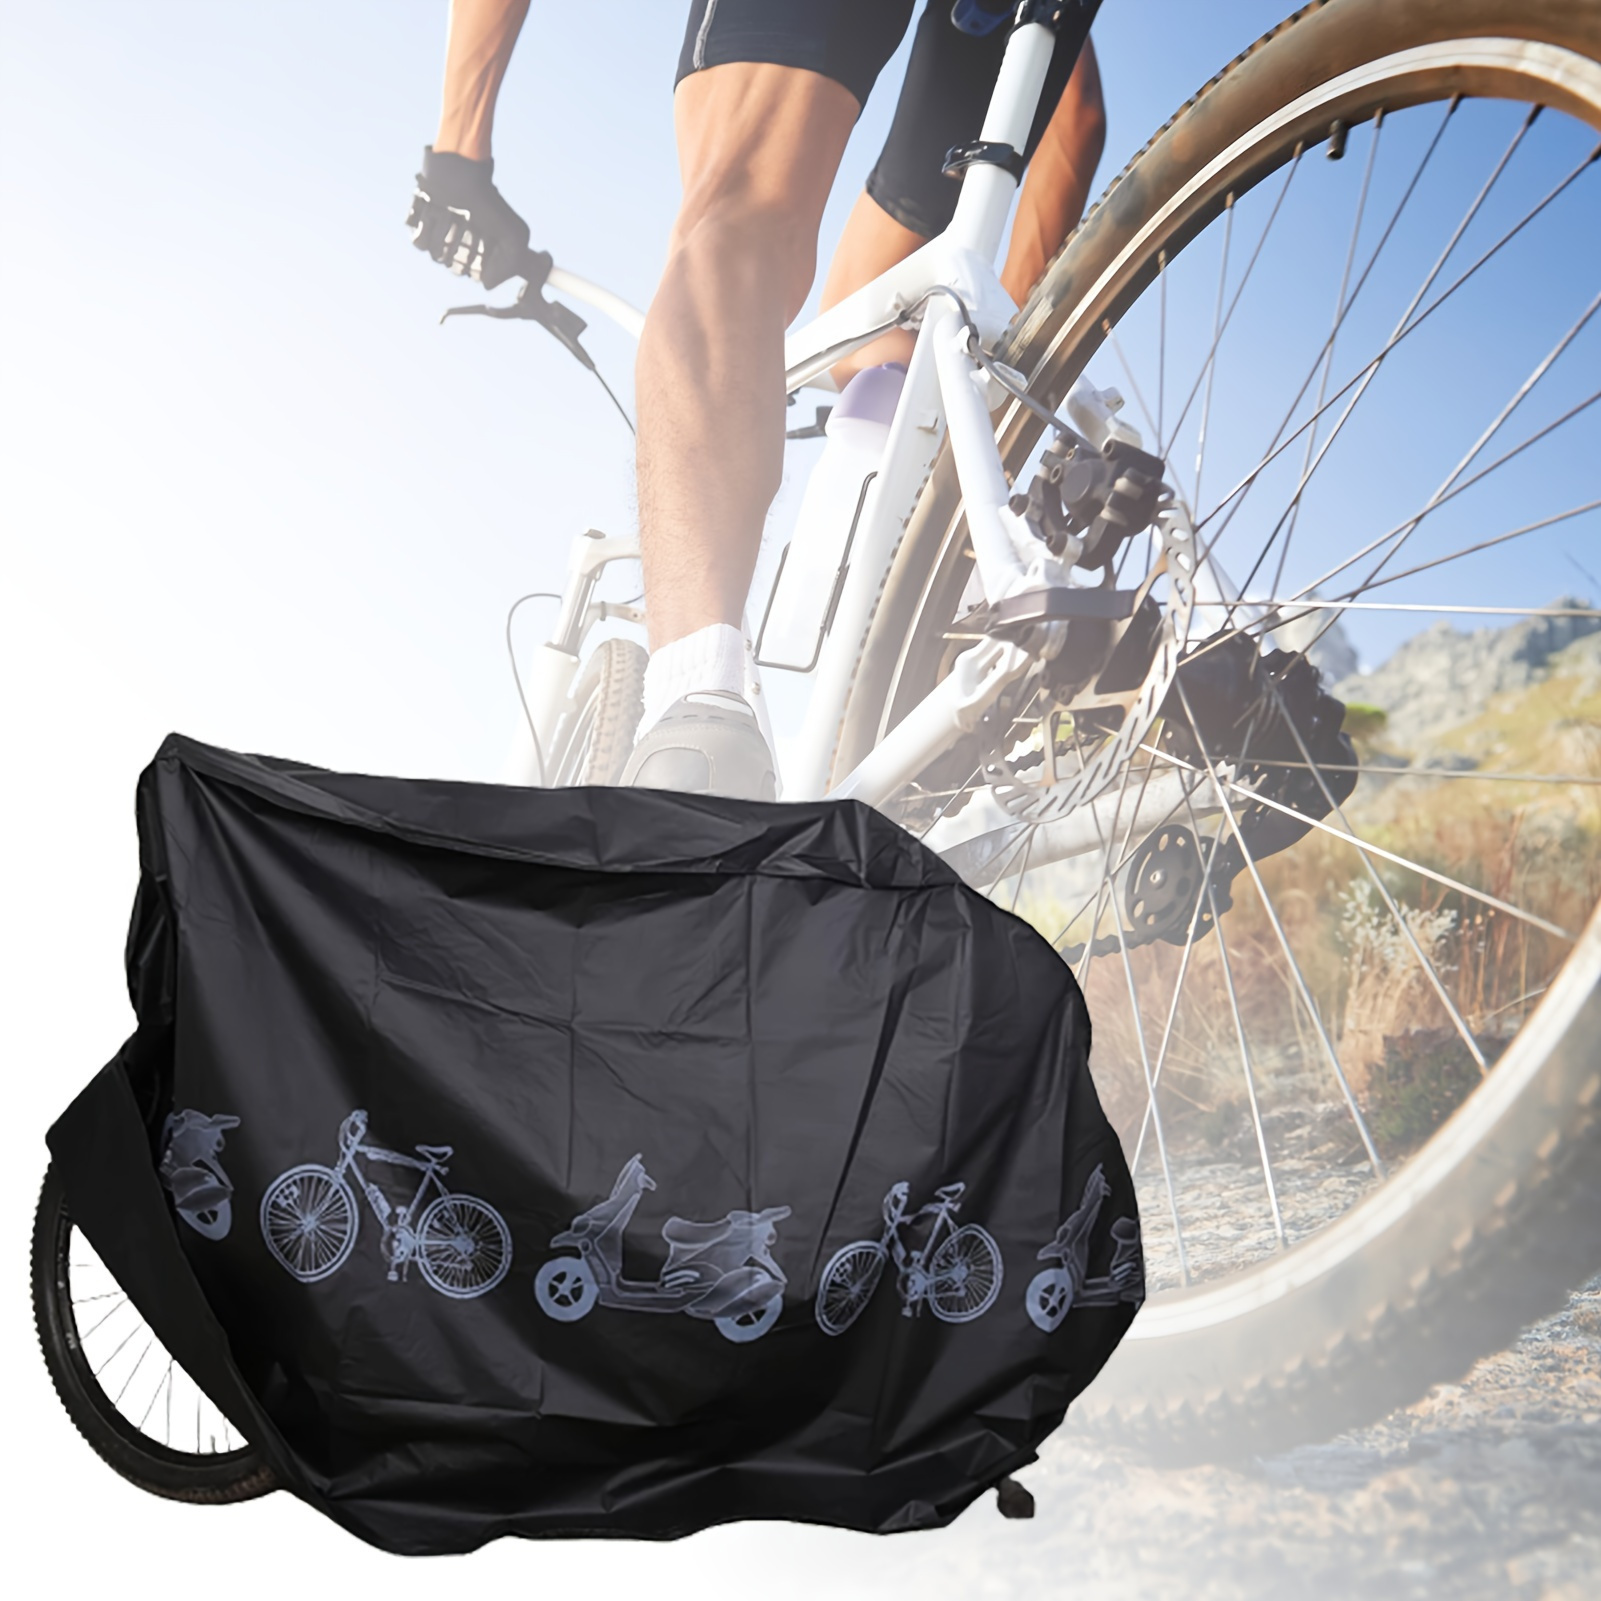 

Waterproof Bicycle Covers, 1pc Eva Material Outdoor Bike Protector For Mountain And Road Bikes, All-weather Dustproof Cycle Storage